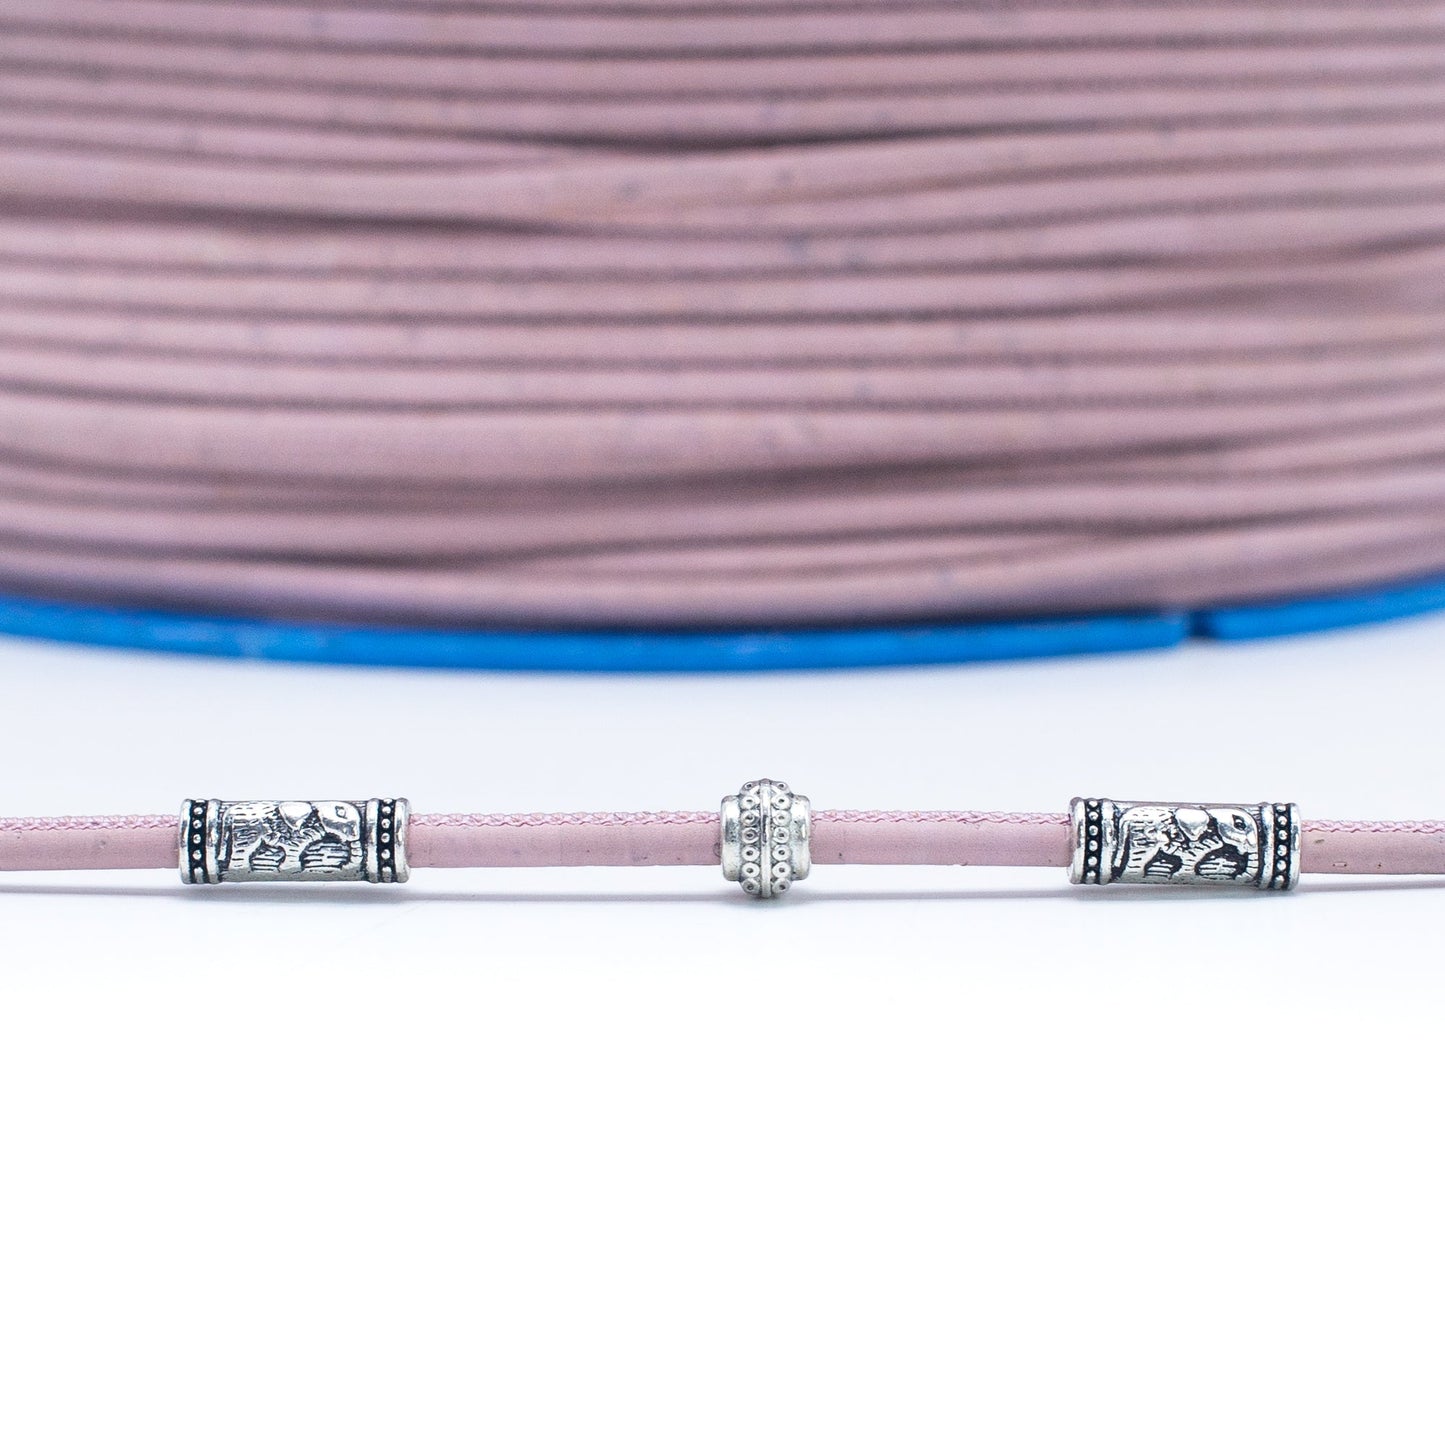 Pink 3mm Round Cork Cord | THE CORK COLLECTION